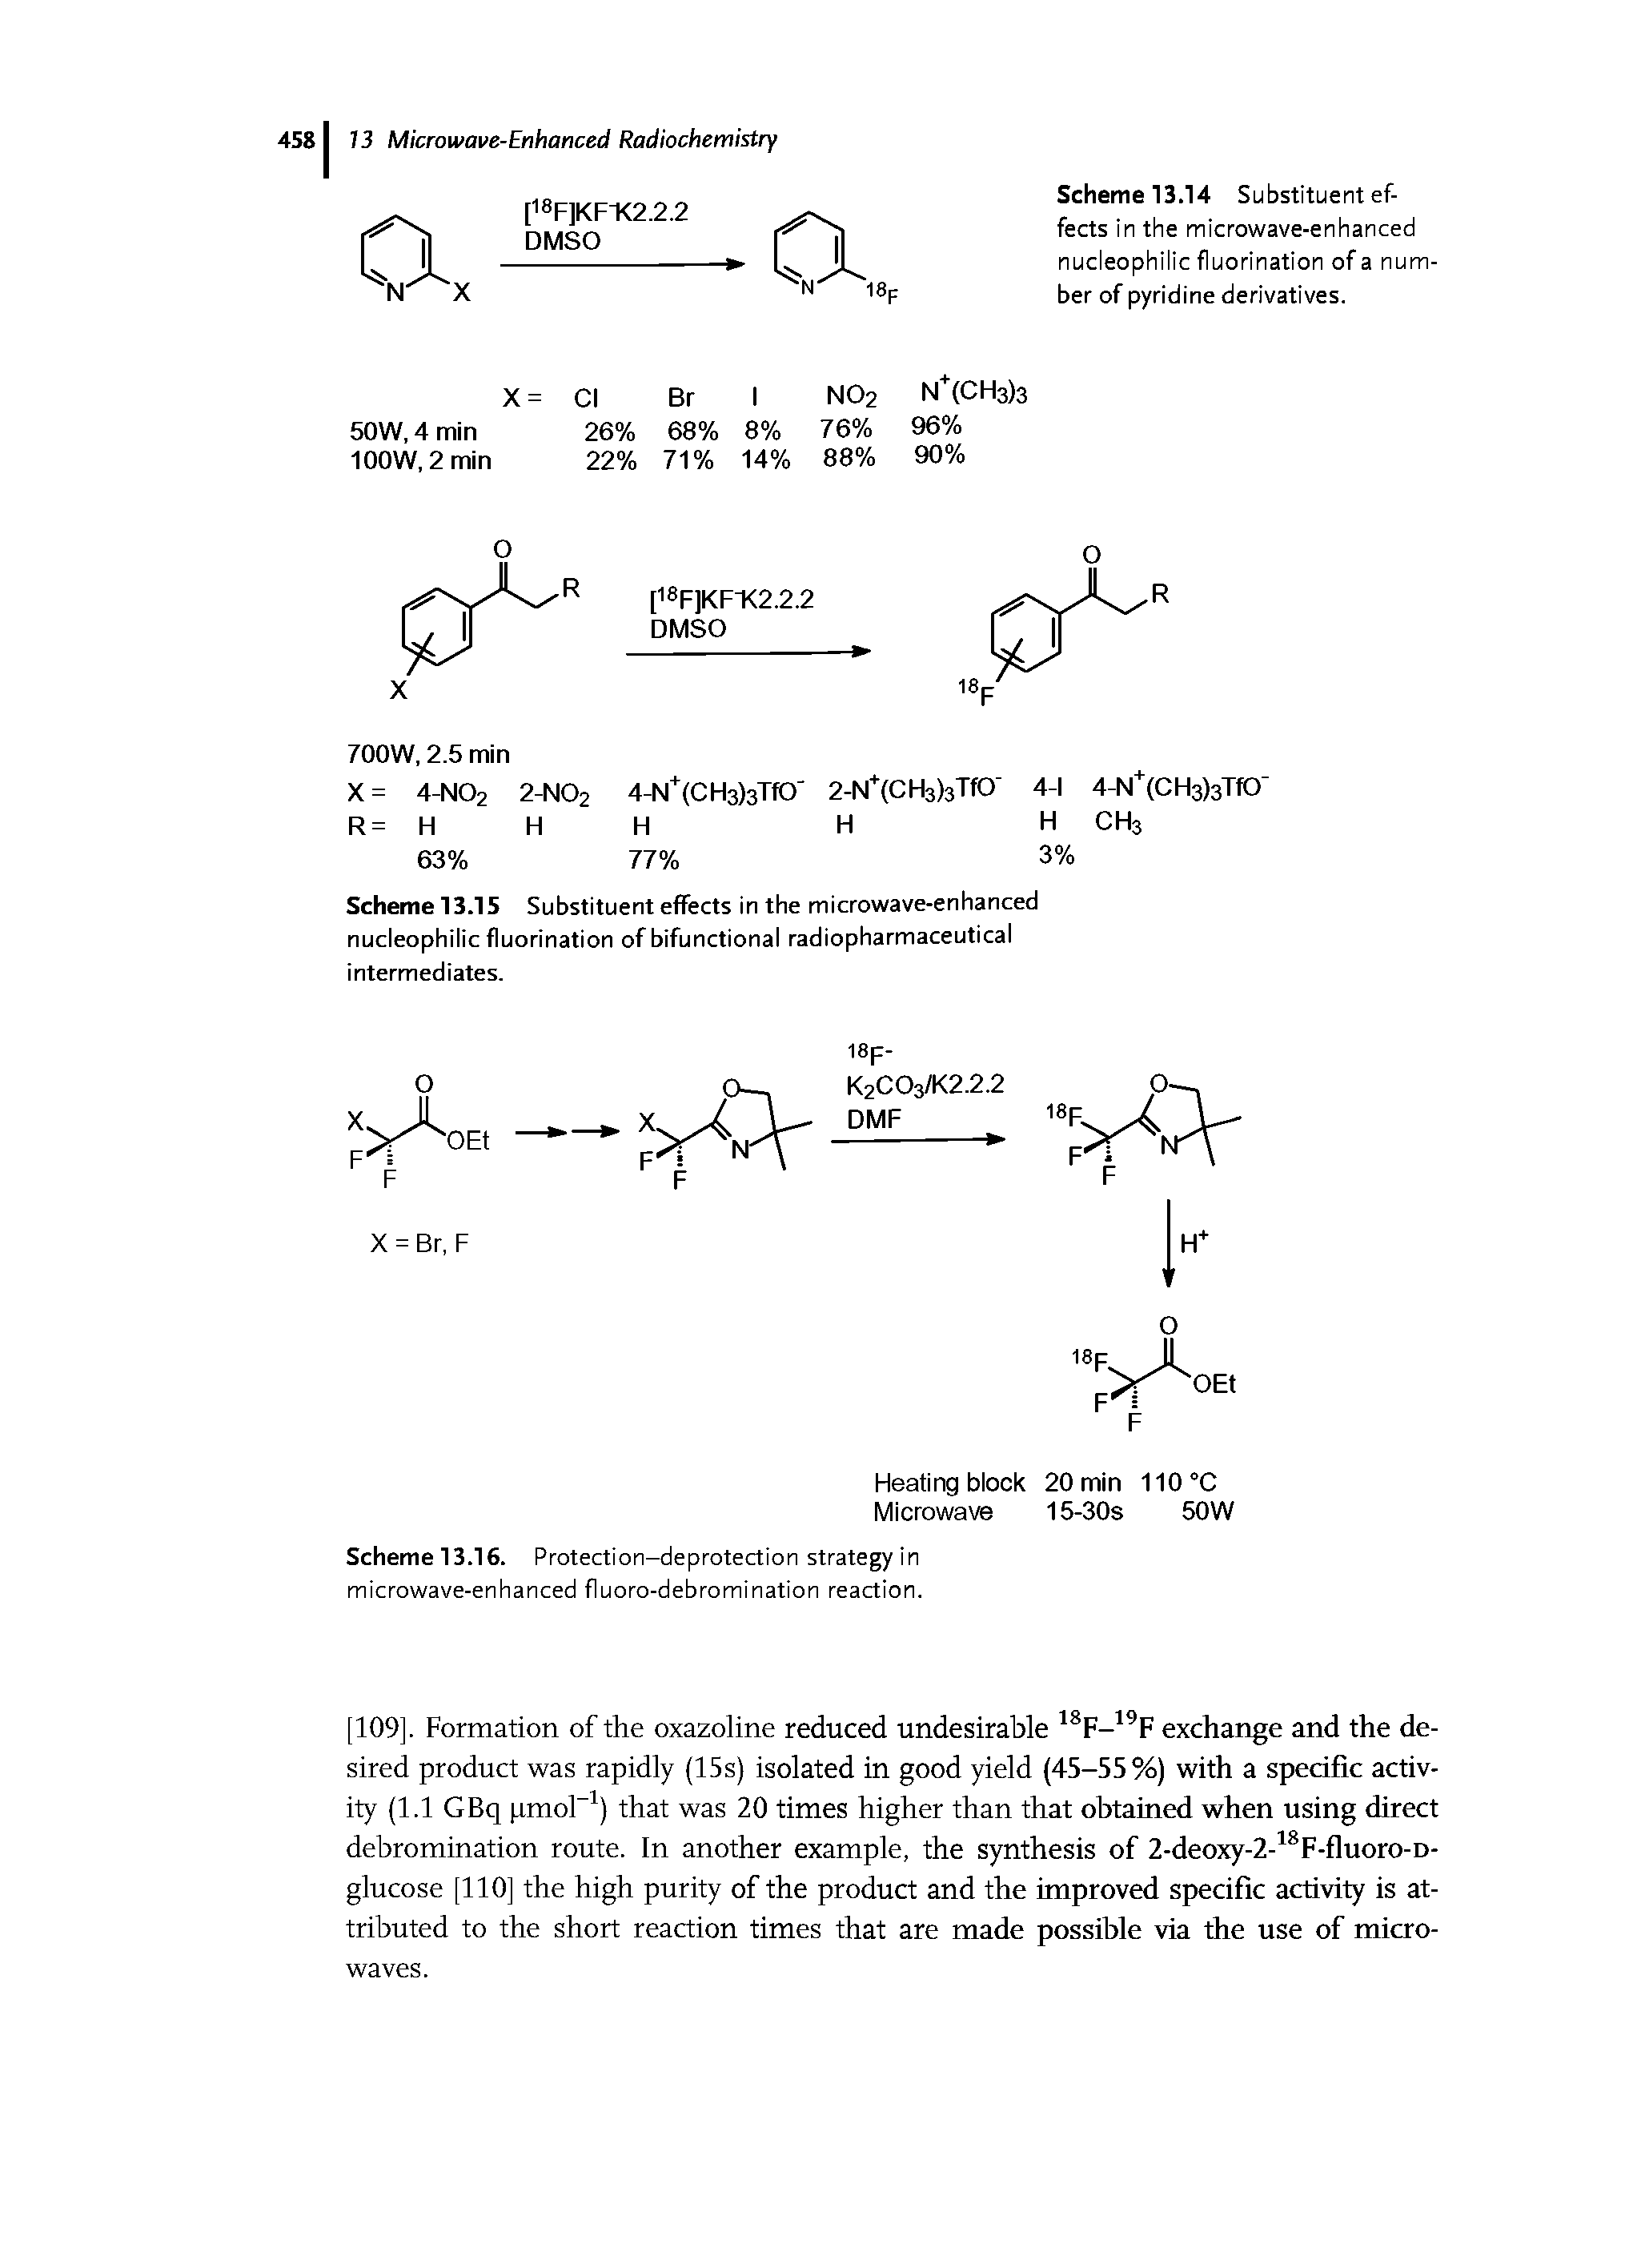 Scheme 13.14 Substituent effects in the microwave-enhanced nucleophilic fluorination of a number of pyridine derivatives.